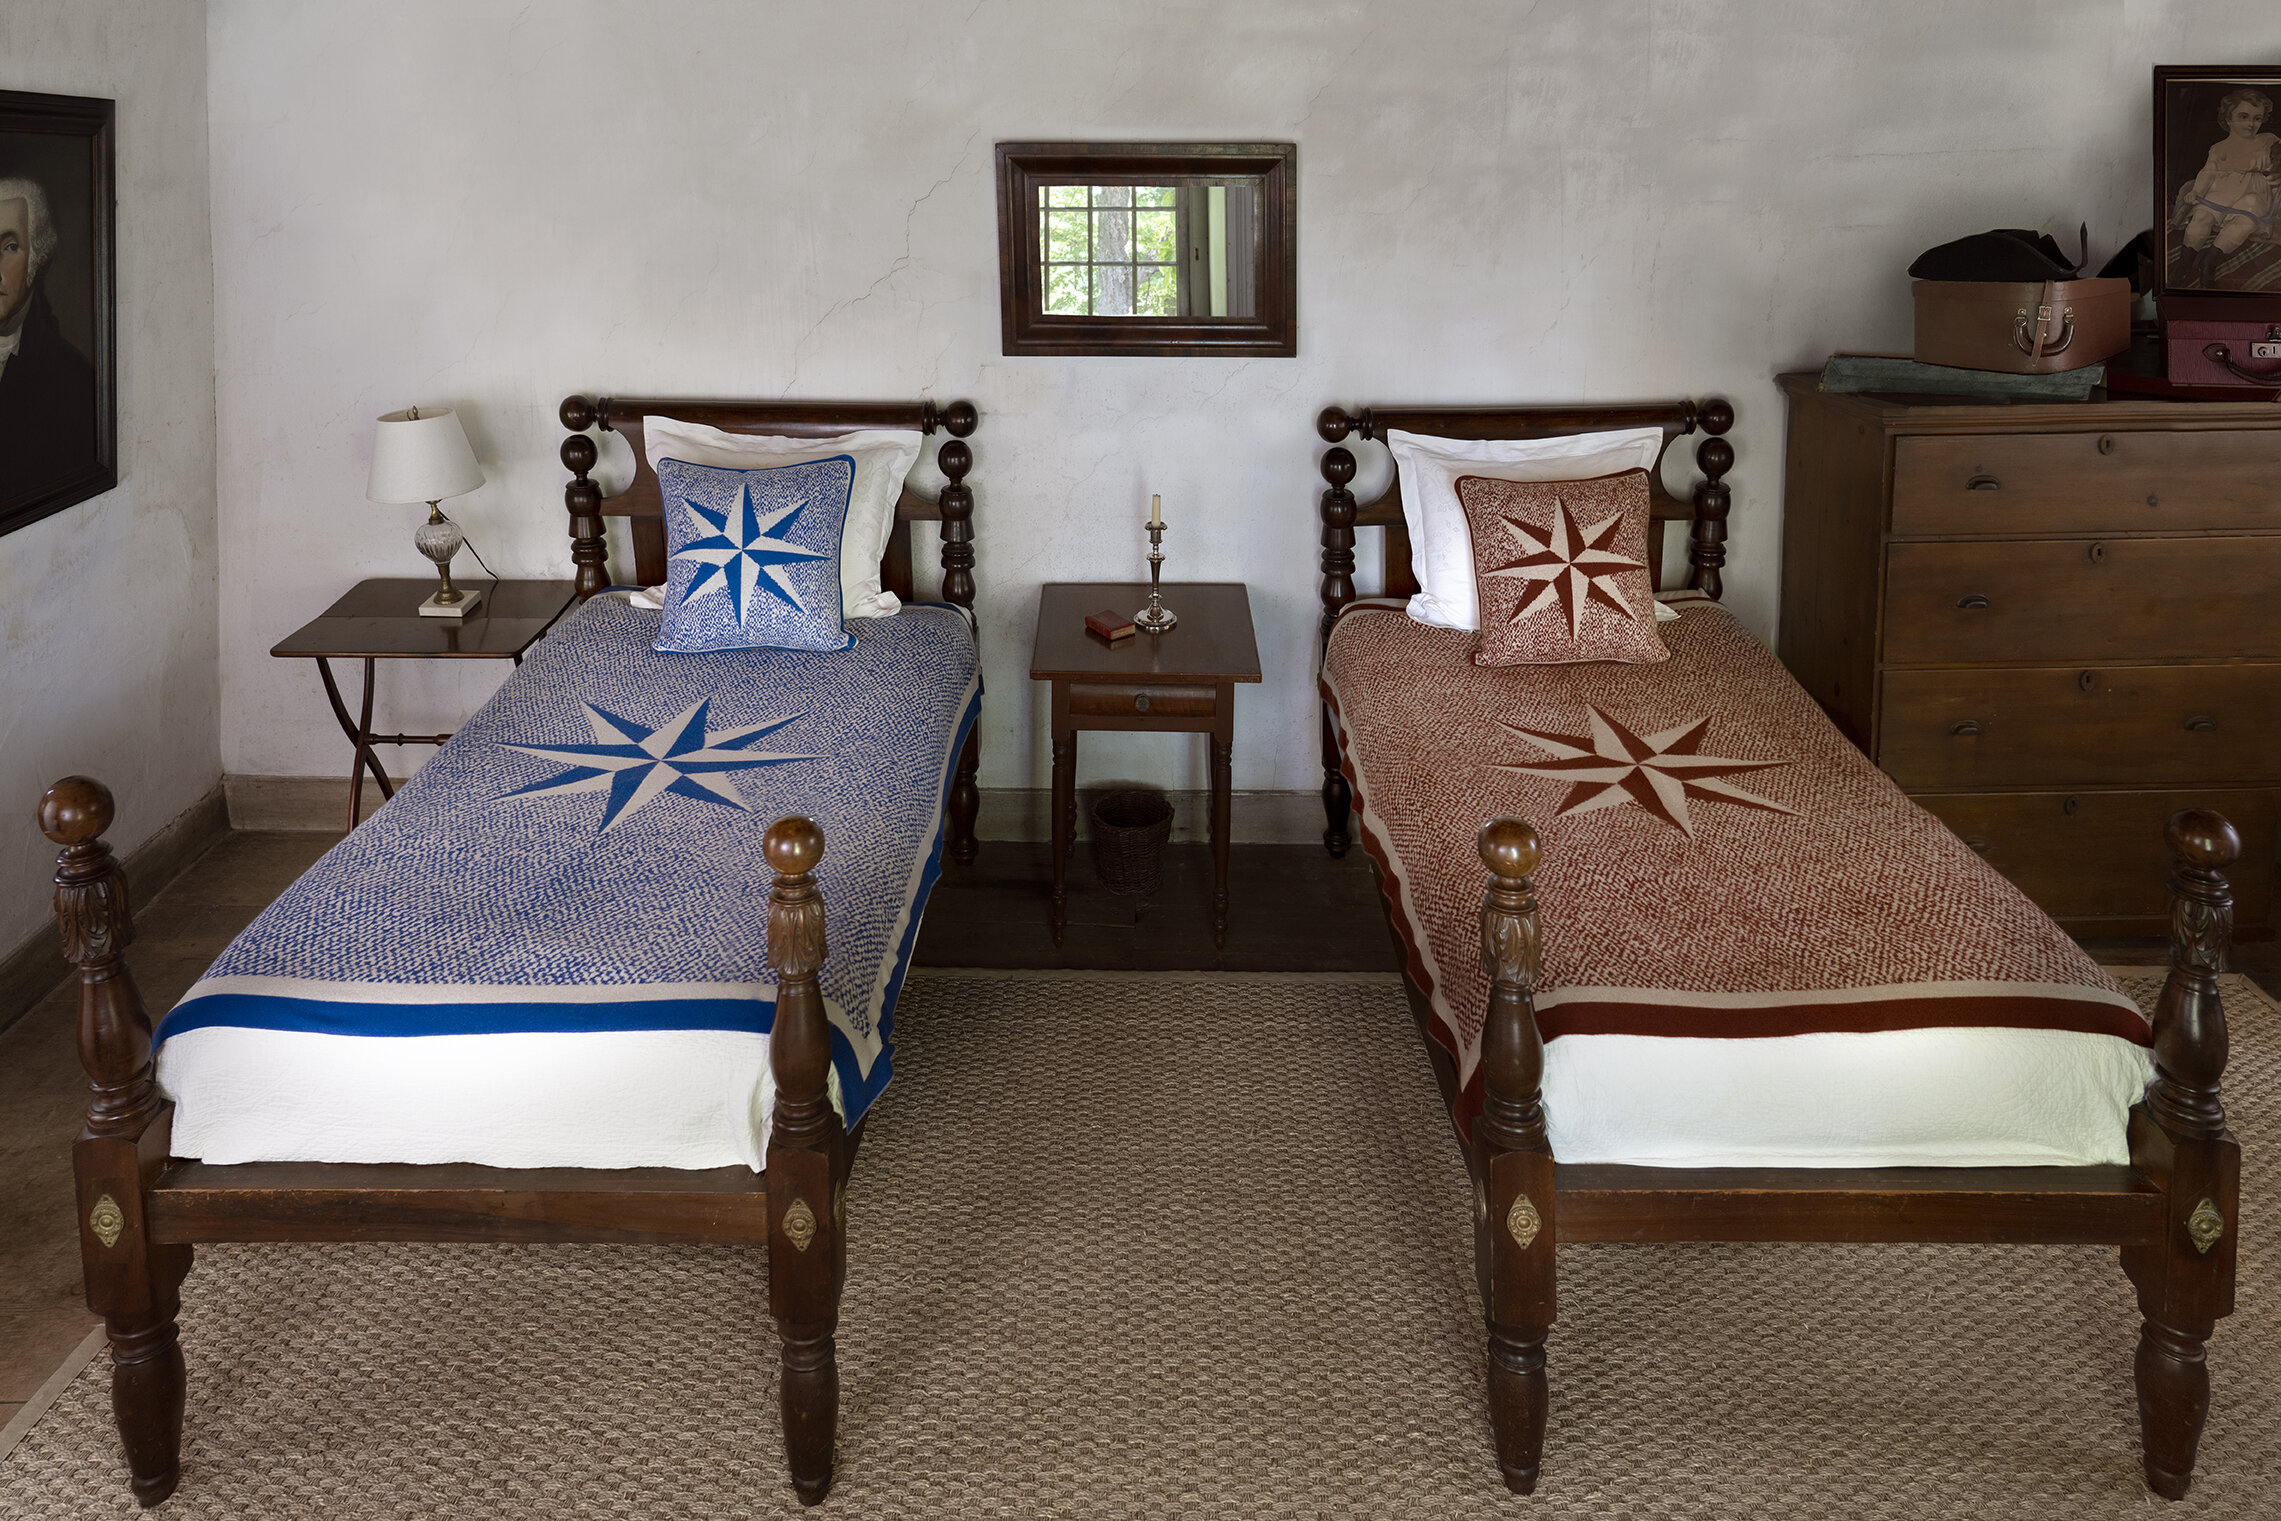 Central Star Throws and Pillows - Rust & Blue.jpg